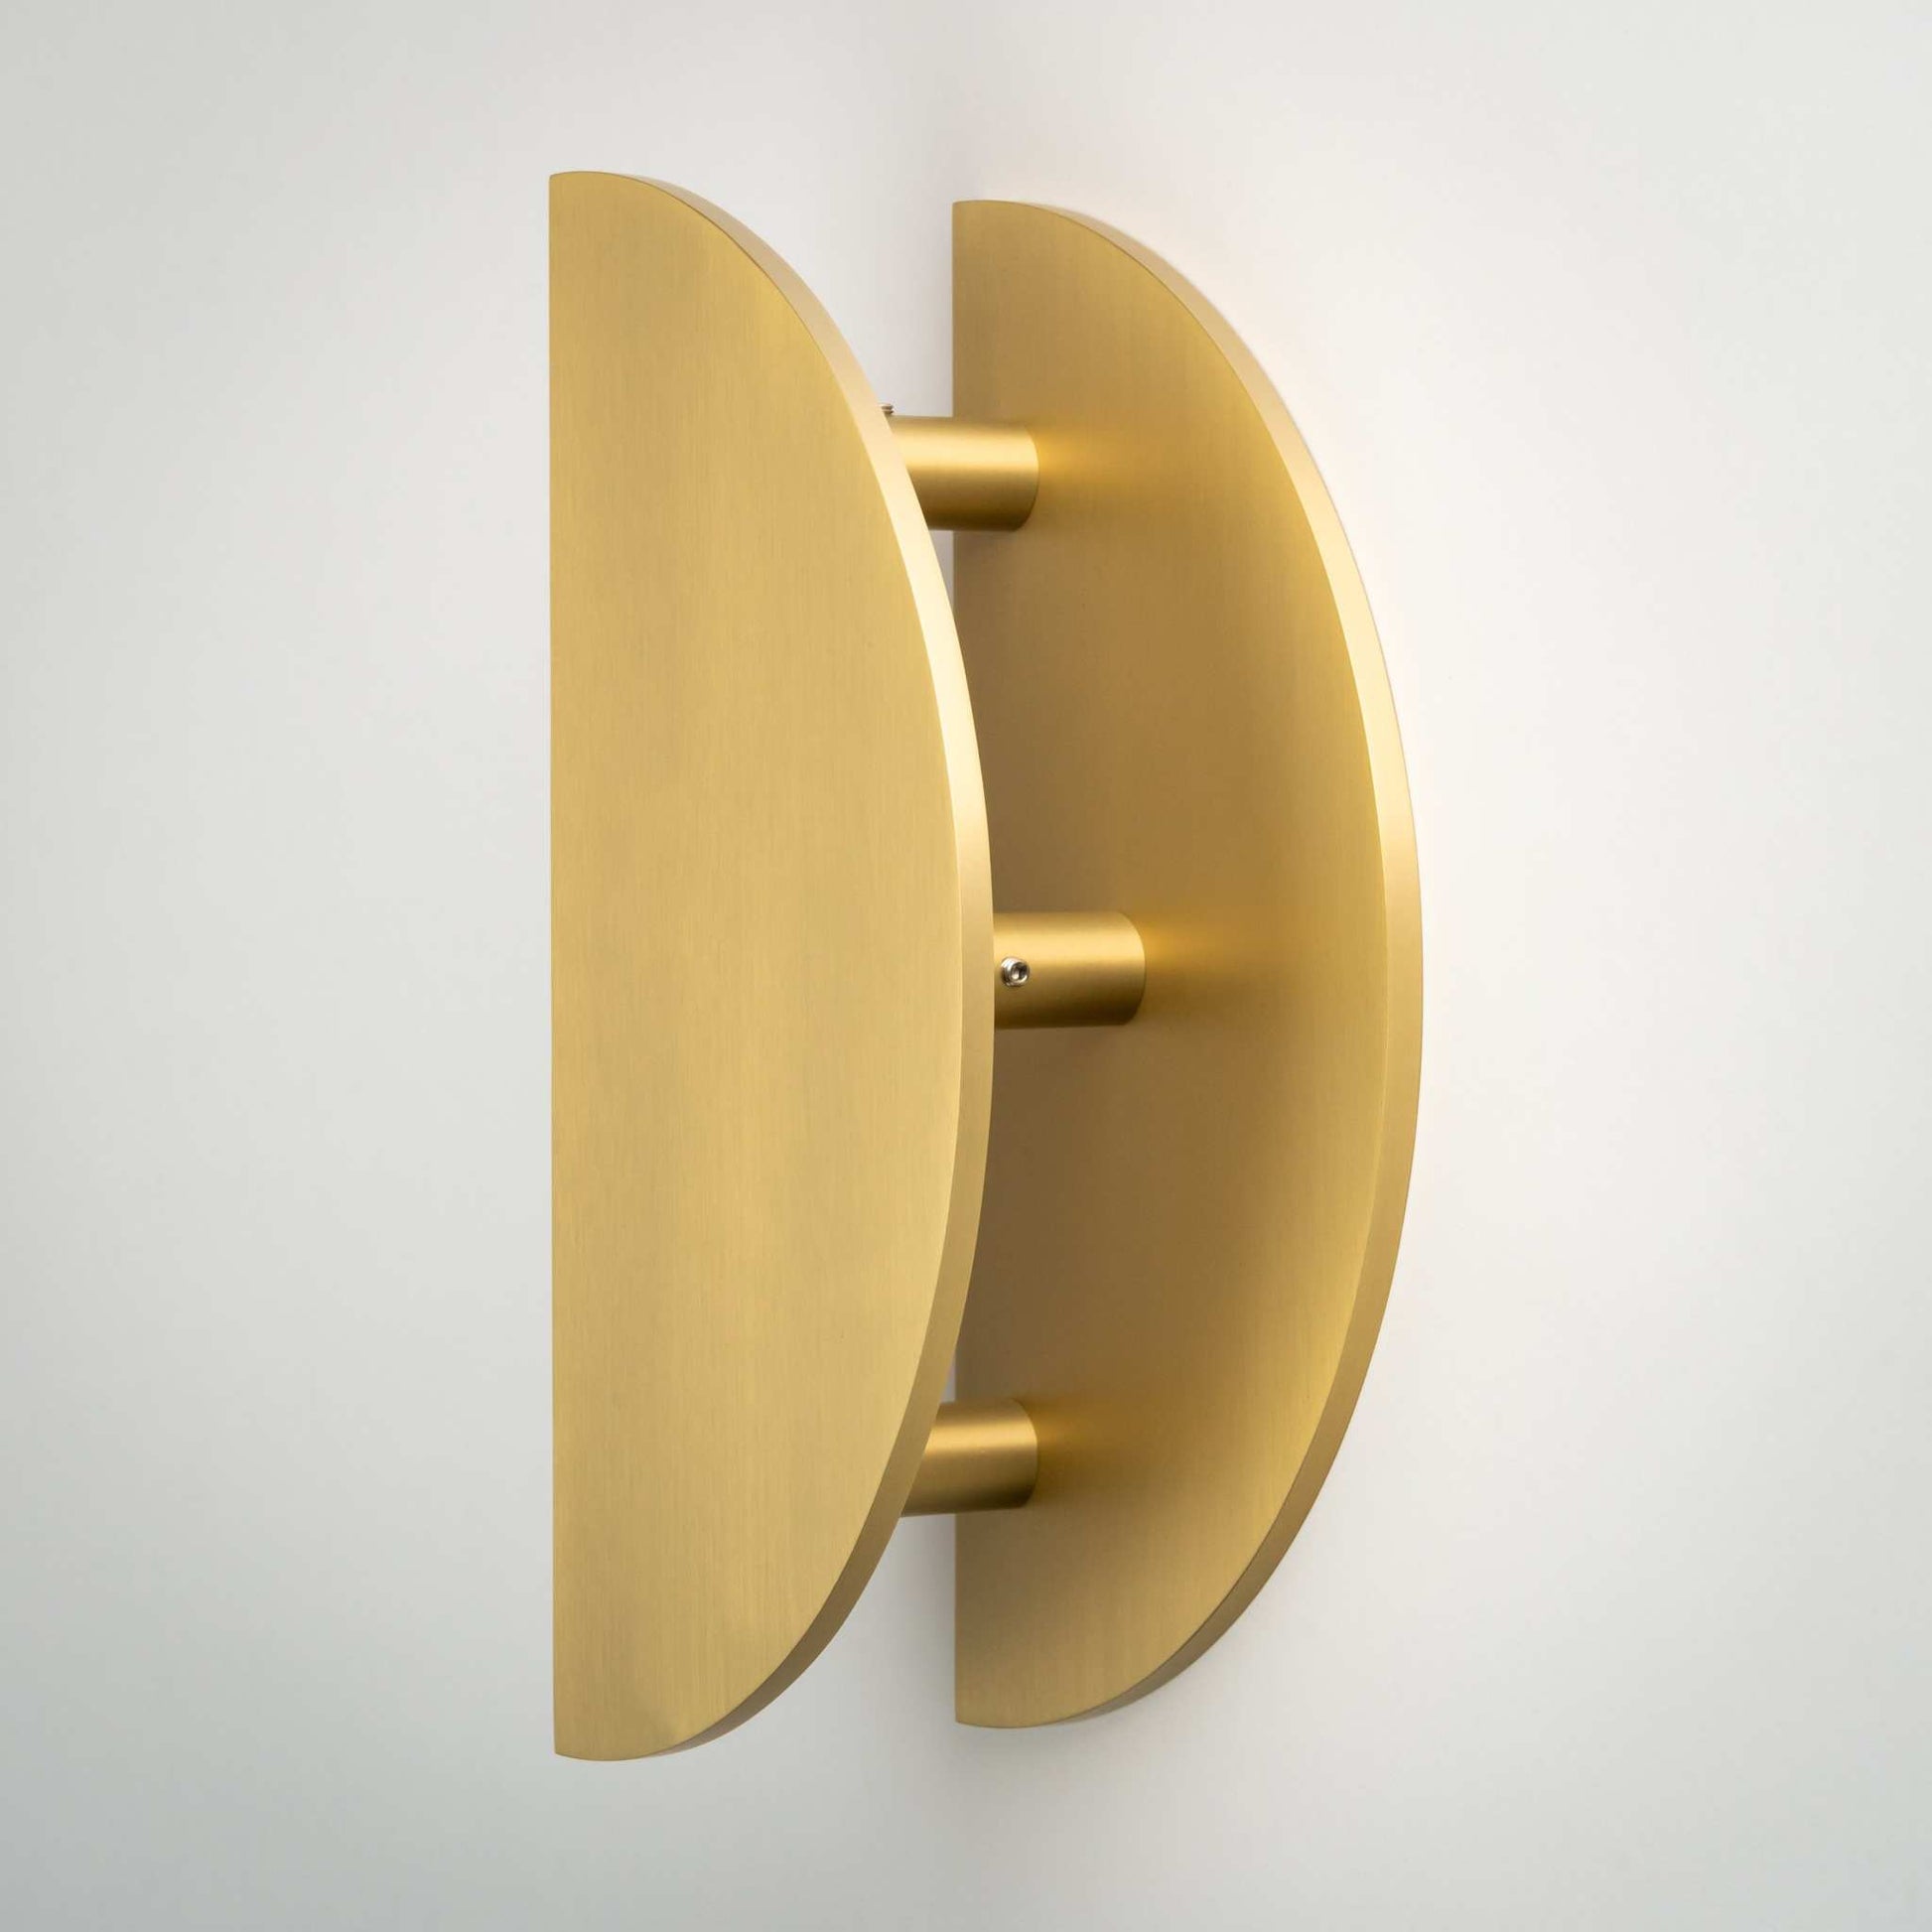 Demi Lune, Solid Brass Half Moon Door HandlesOur handmade Demi Lune door handle is designed to be mounted vertically as a half moon or in 2 pairs to form a full circle. In either orientation, it exudes Zen and Door HandlesDemi Lune, Solid Brass Half Moon Door Handles